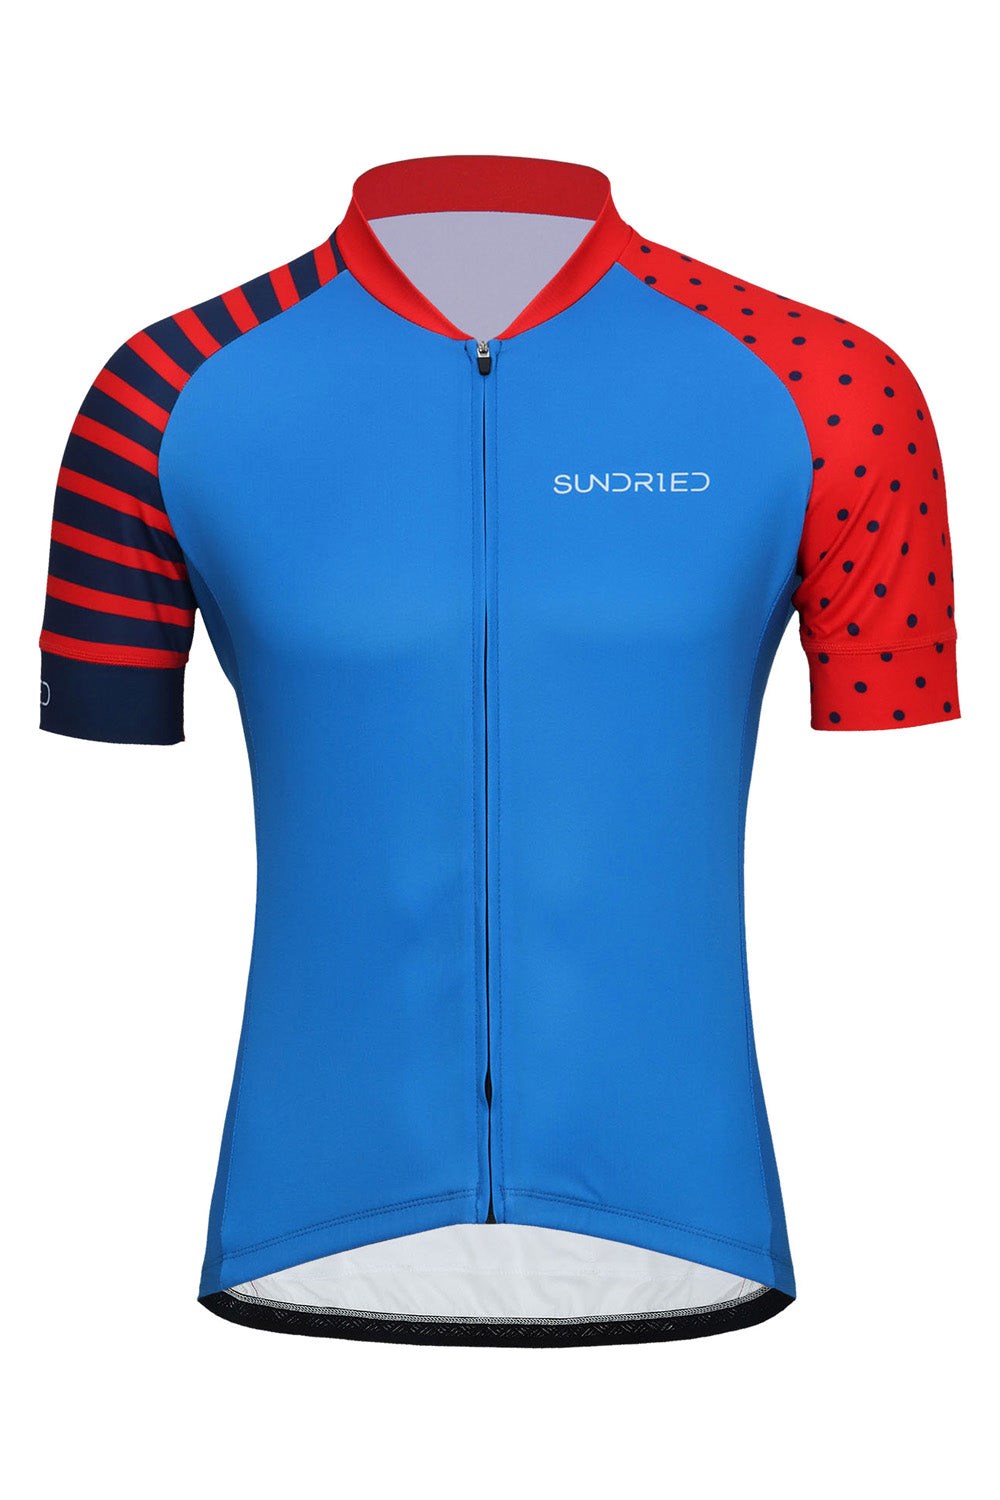 Spots & Stripes Mens Short Sleeve Cycle Jersey -